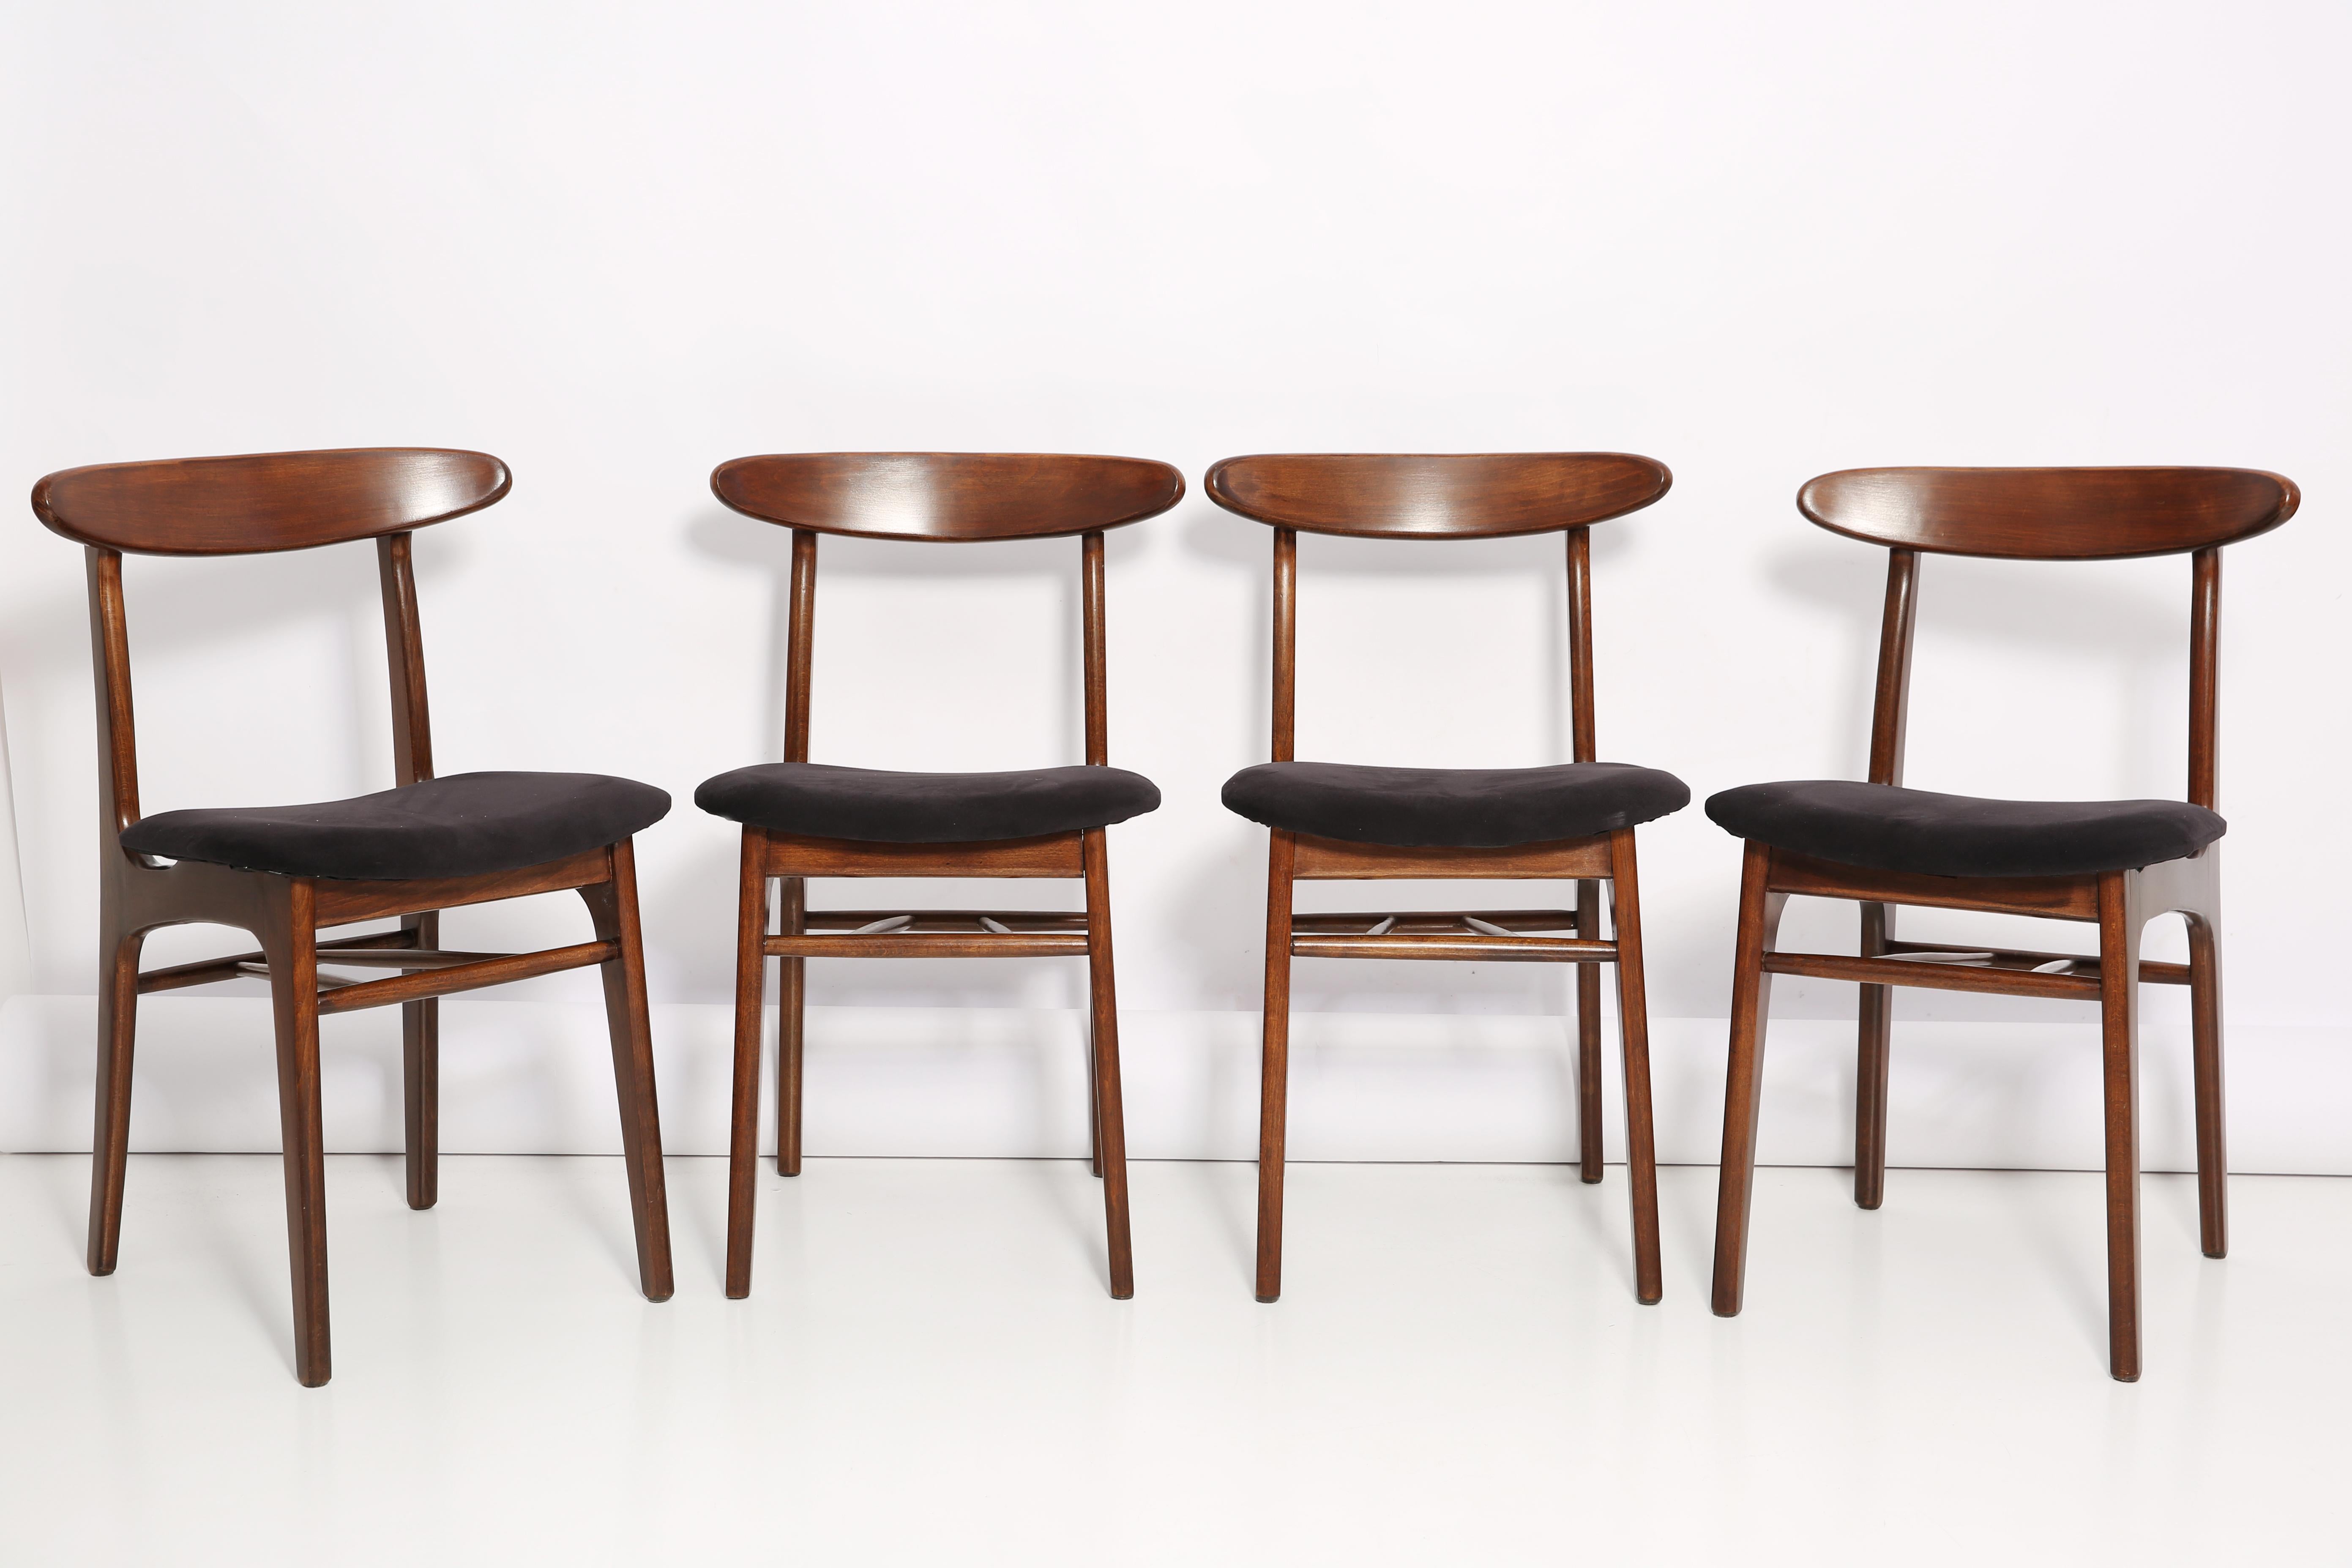 Chairs designed by Prof. Rajmund Halas. Made of beechwood. The set is after a complete upholstery renovation, the woodwork has been refreshed. Seat is dressed in black, durable and pleasant to the touch velvet fabric. Chair is stabile and very